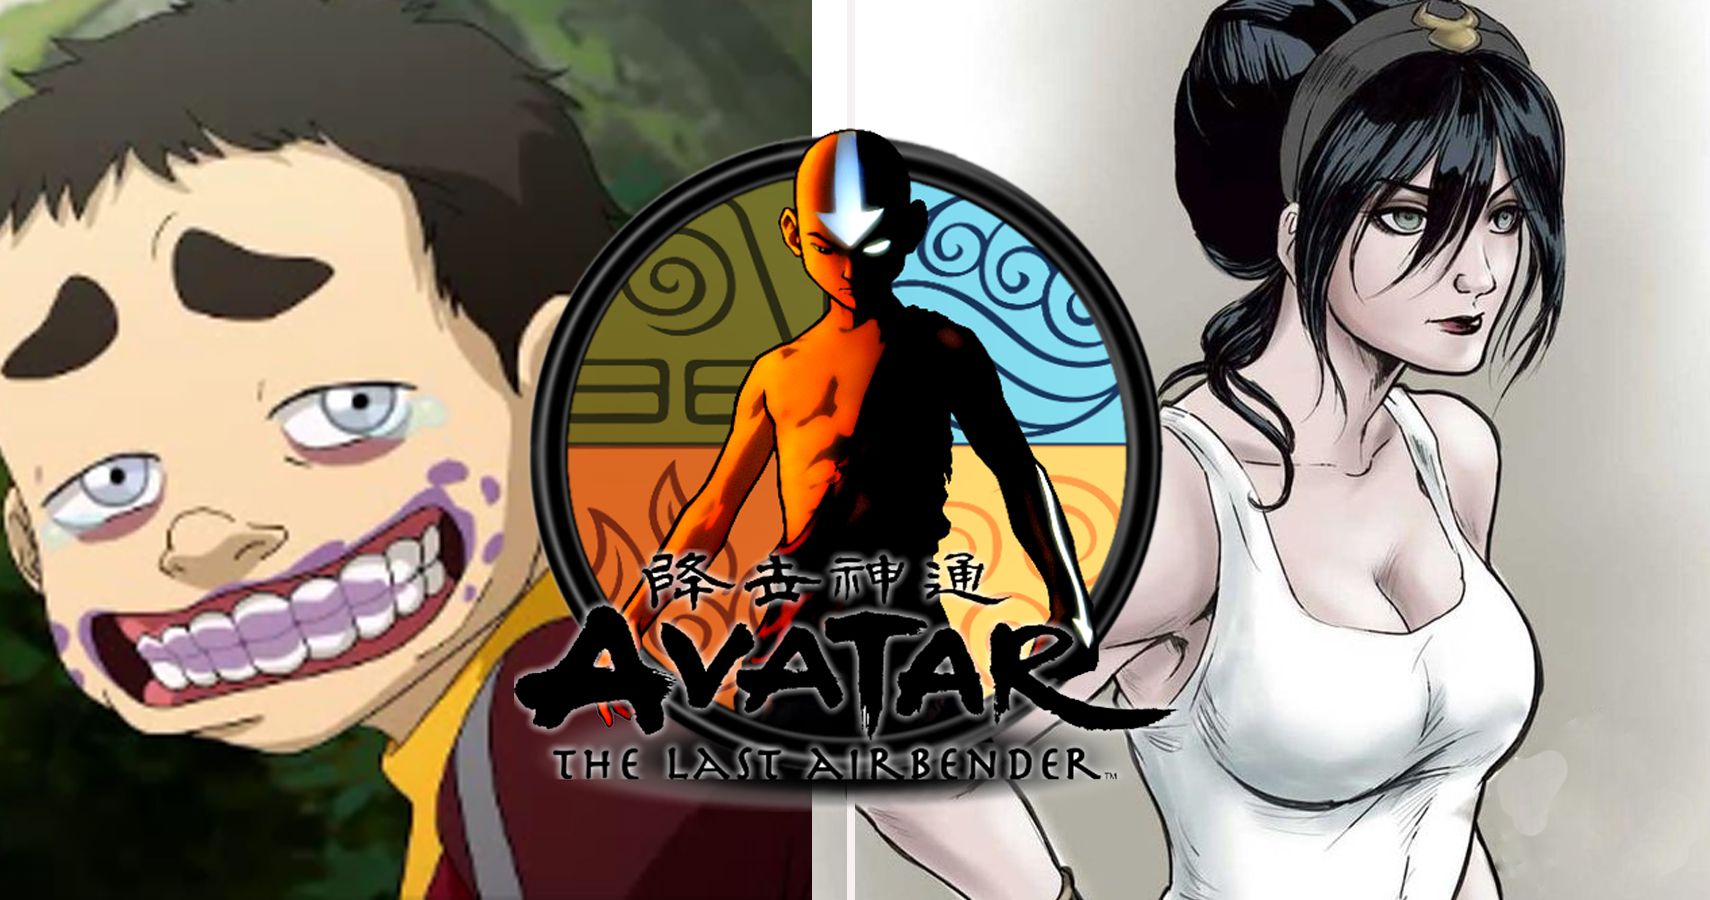 25 Wow Class Facts You Didn’t Know About Avatar The Last Airbender